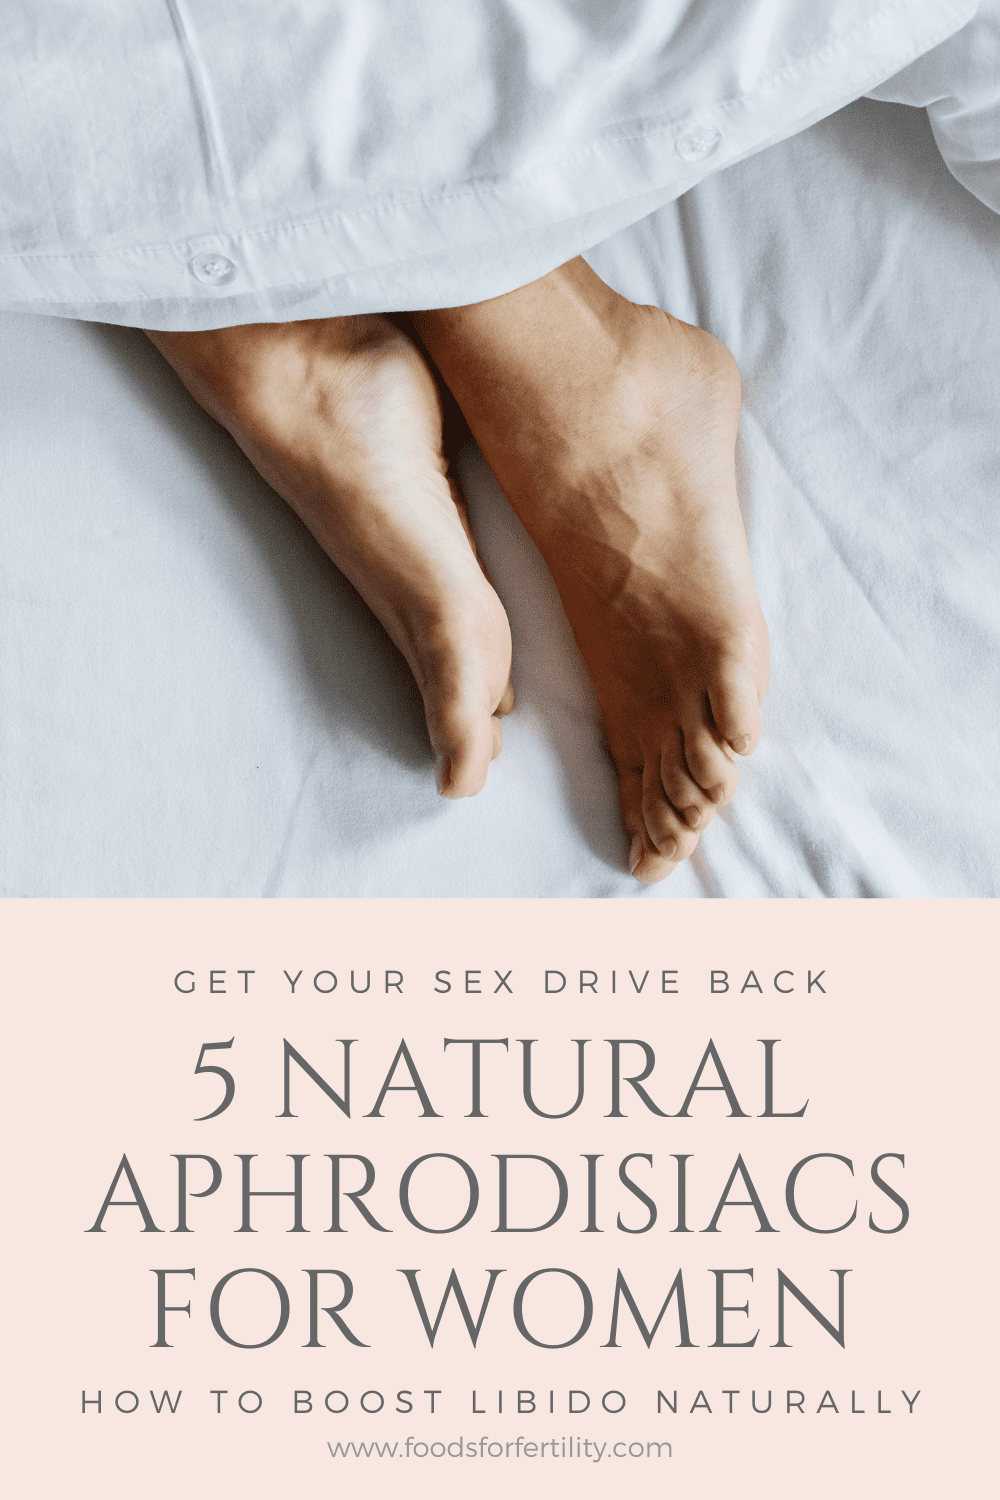 5 Natural Aphrodisiacs for Women – How to Boost Libido Naturally